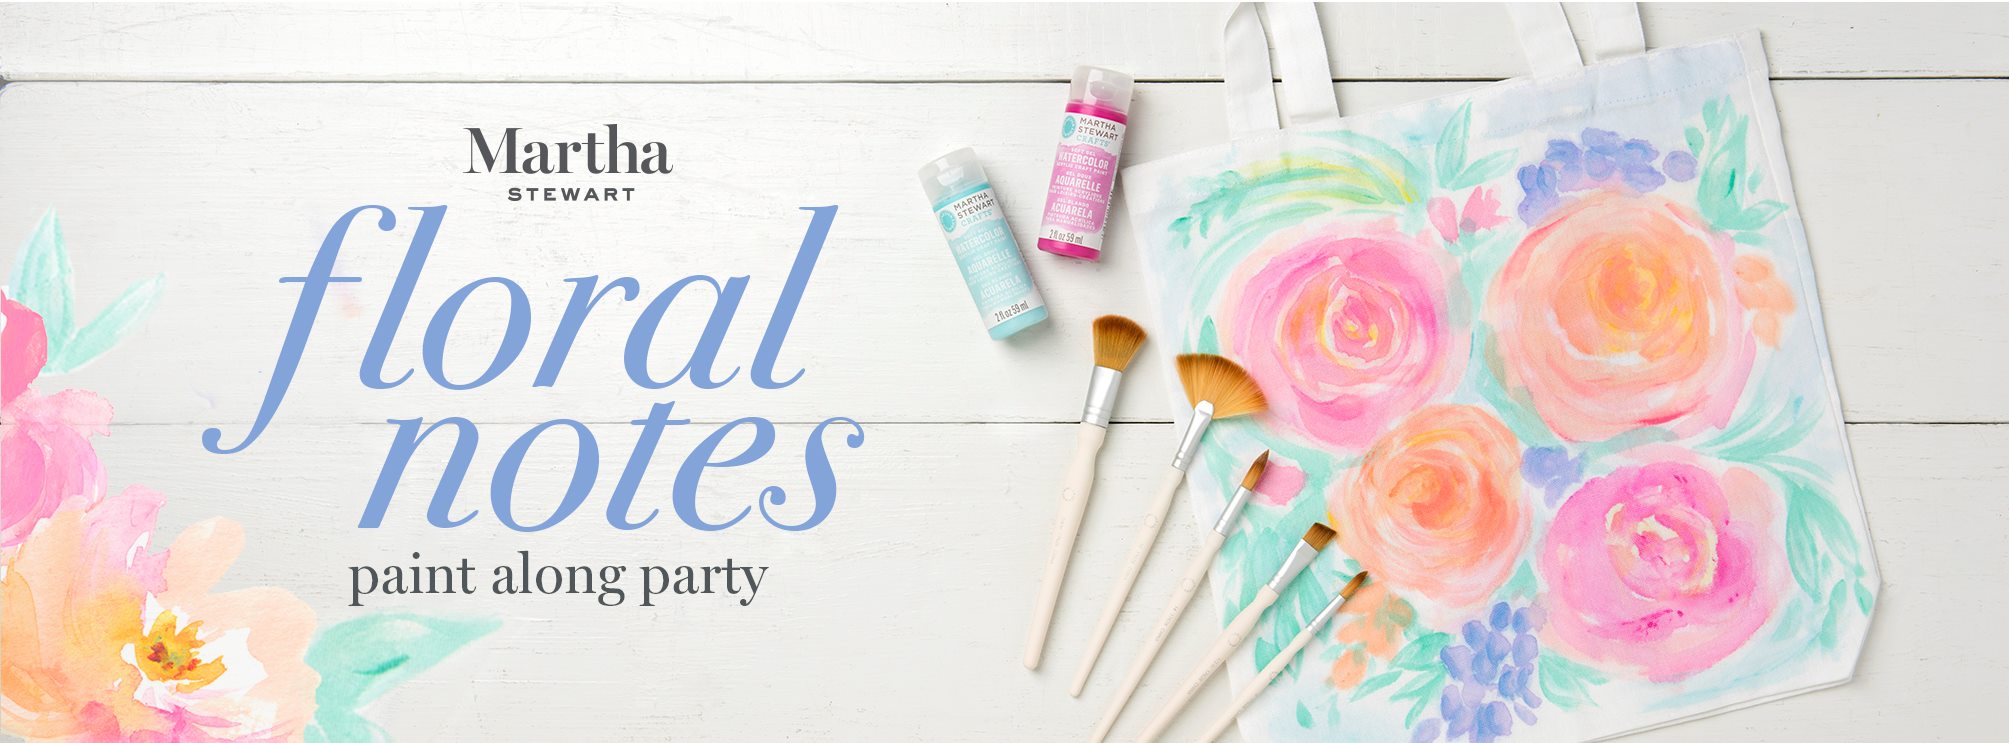 Martha Stewart Floral Notes Paint Along Party